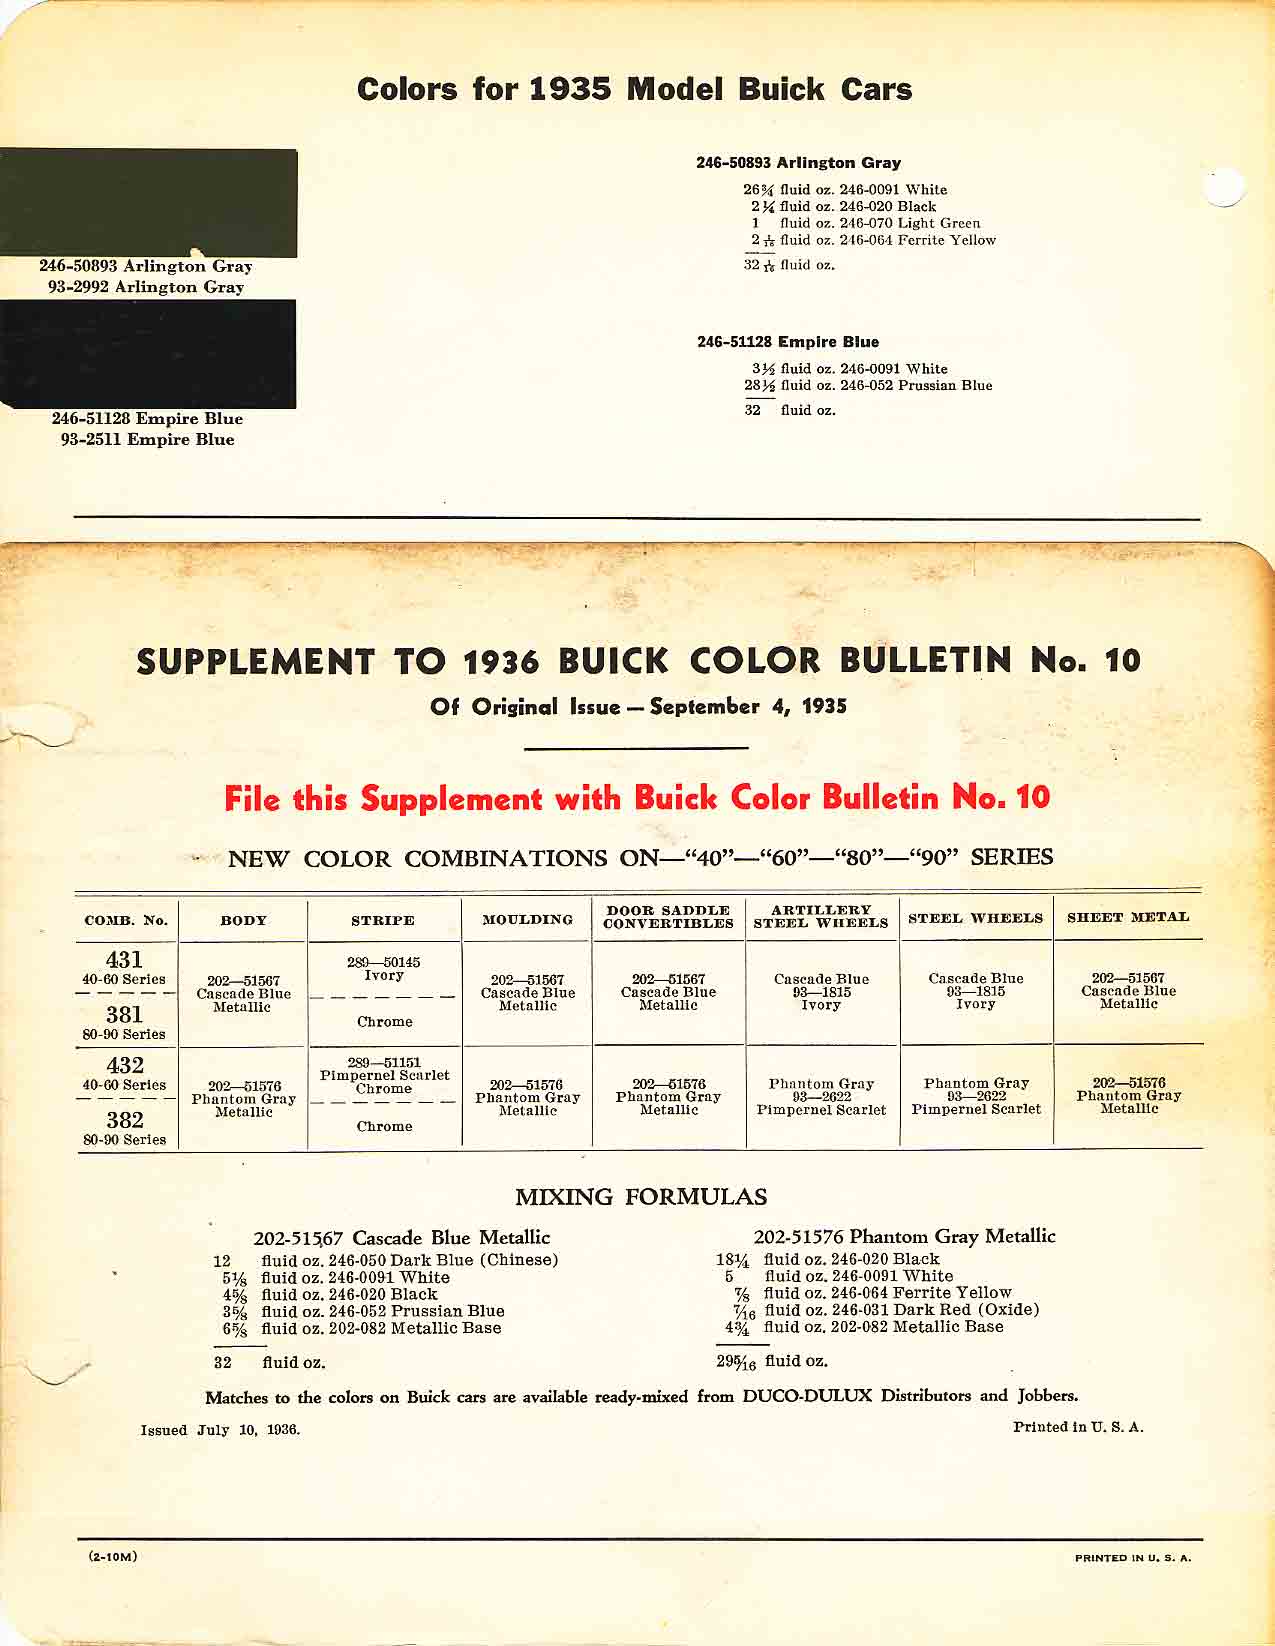 Colors and codes used on Buick Vehicles in 1935